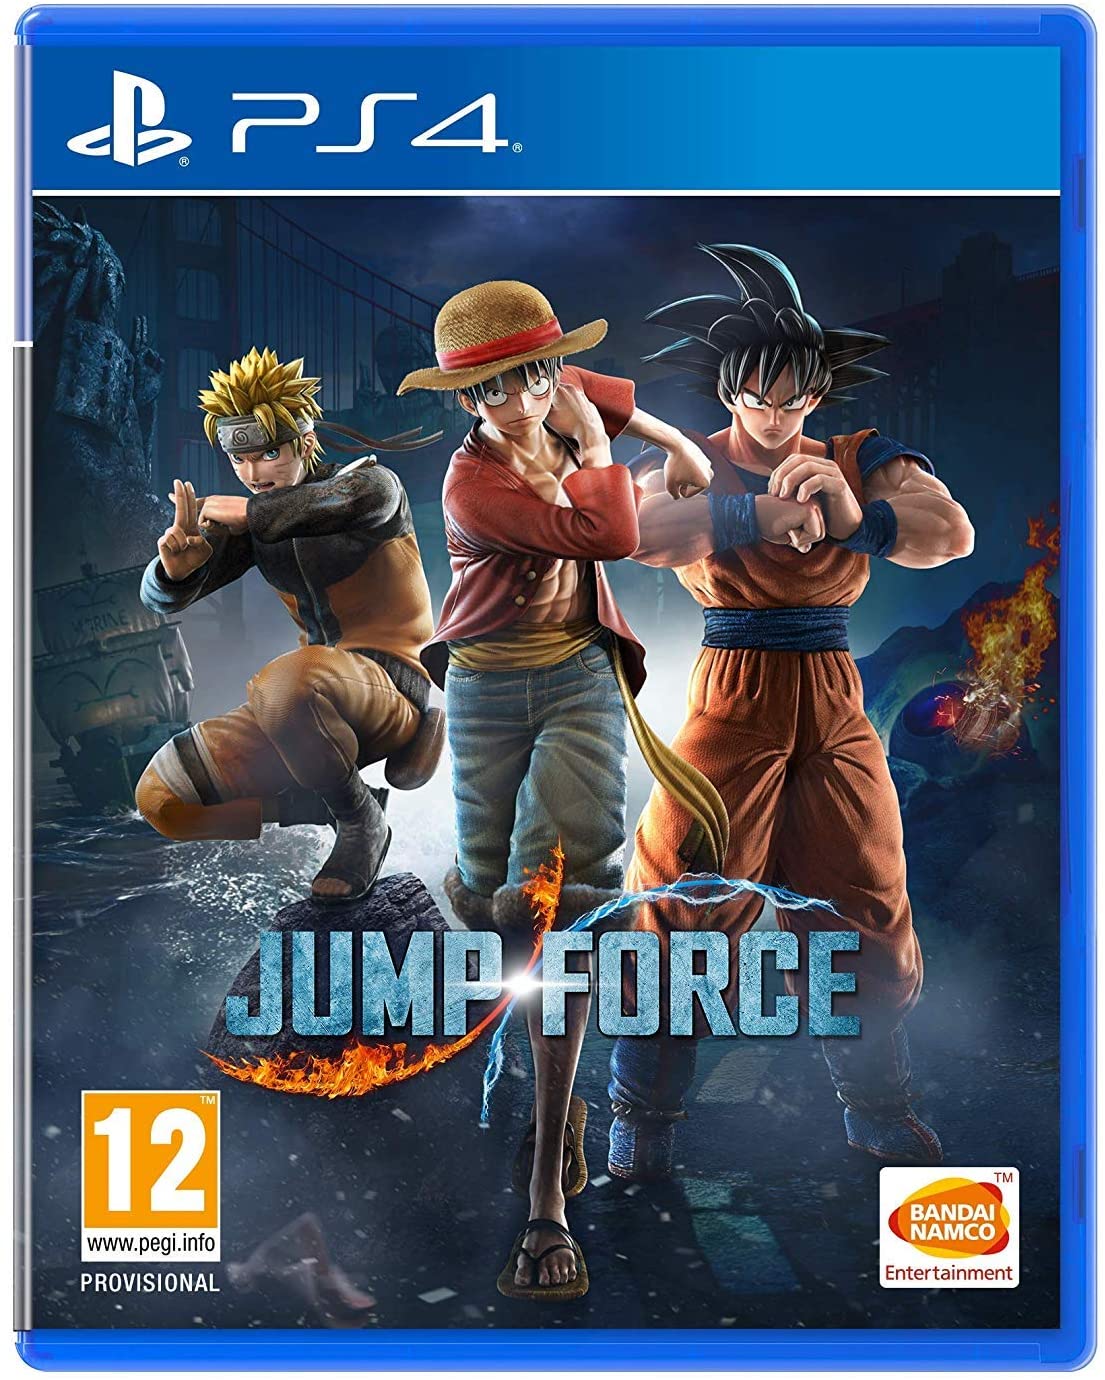 JUMP FORCE - PS4